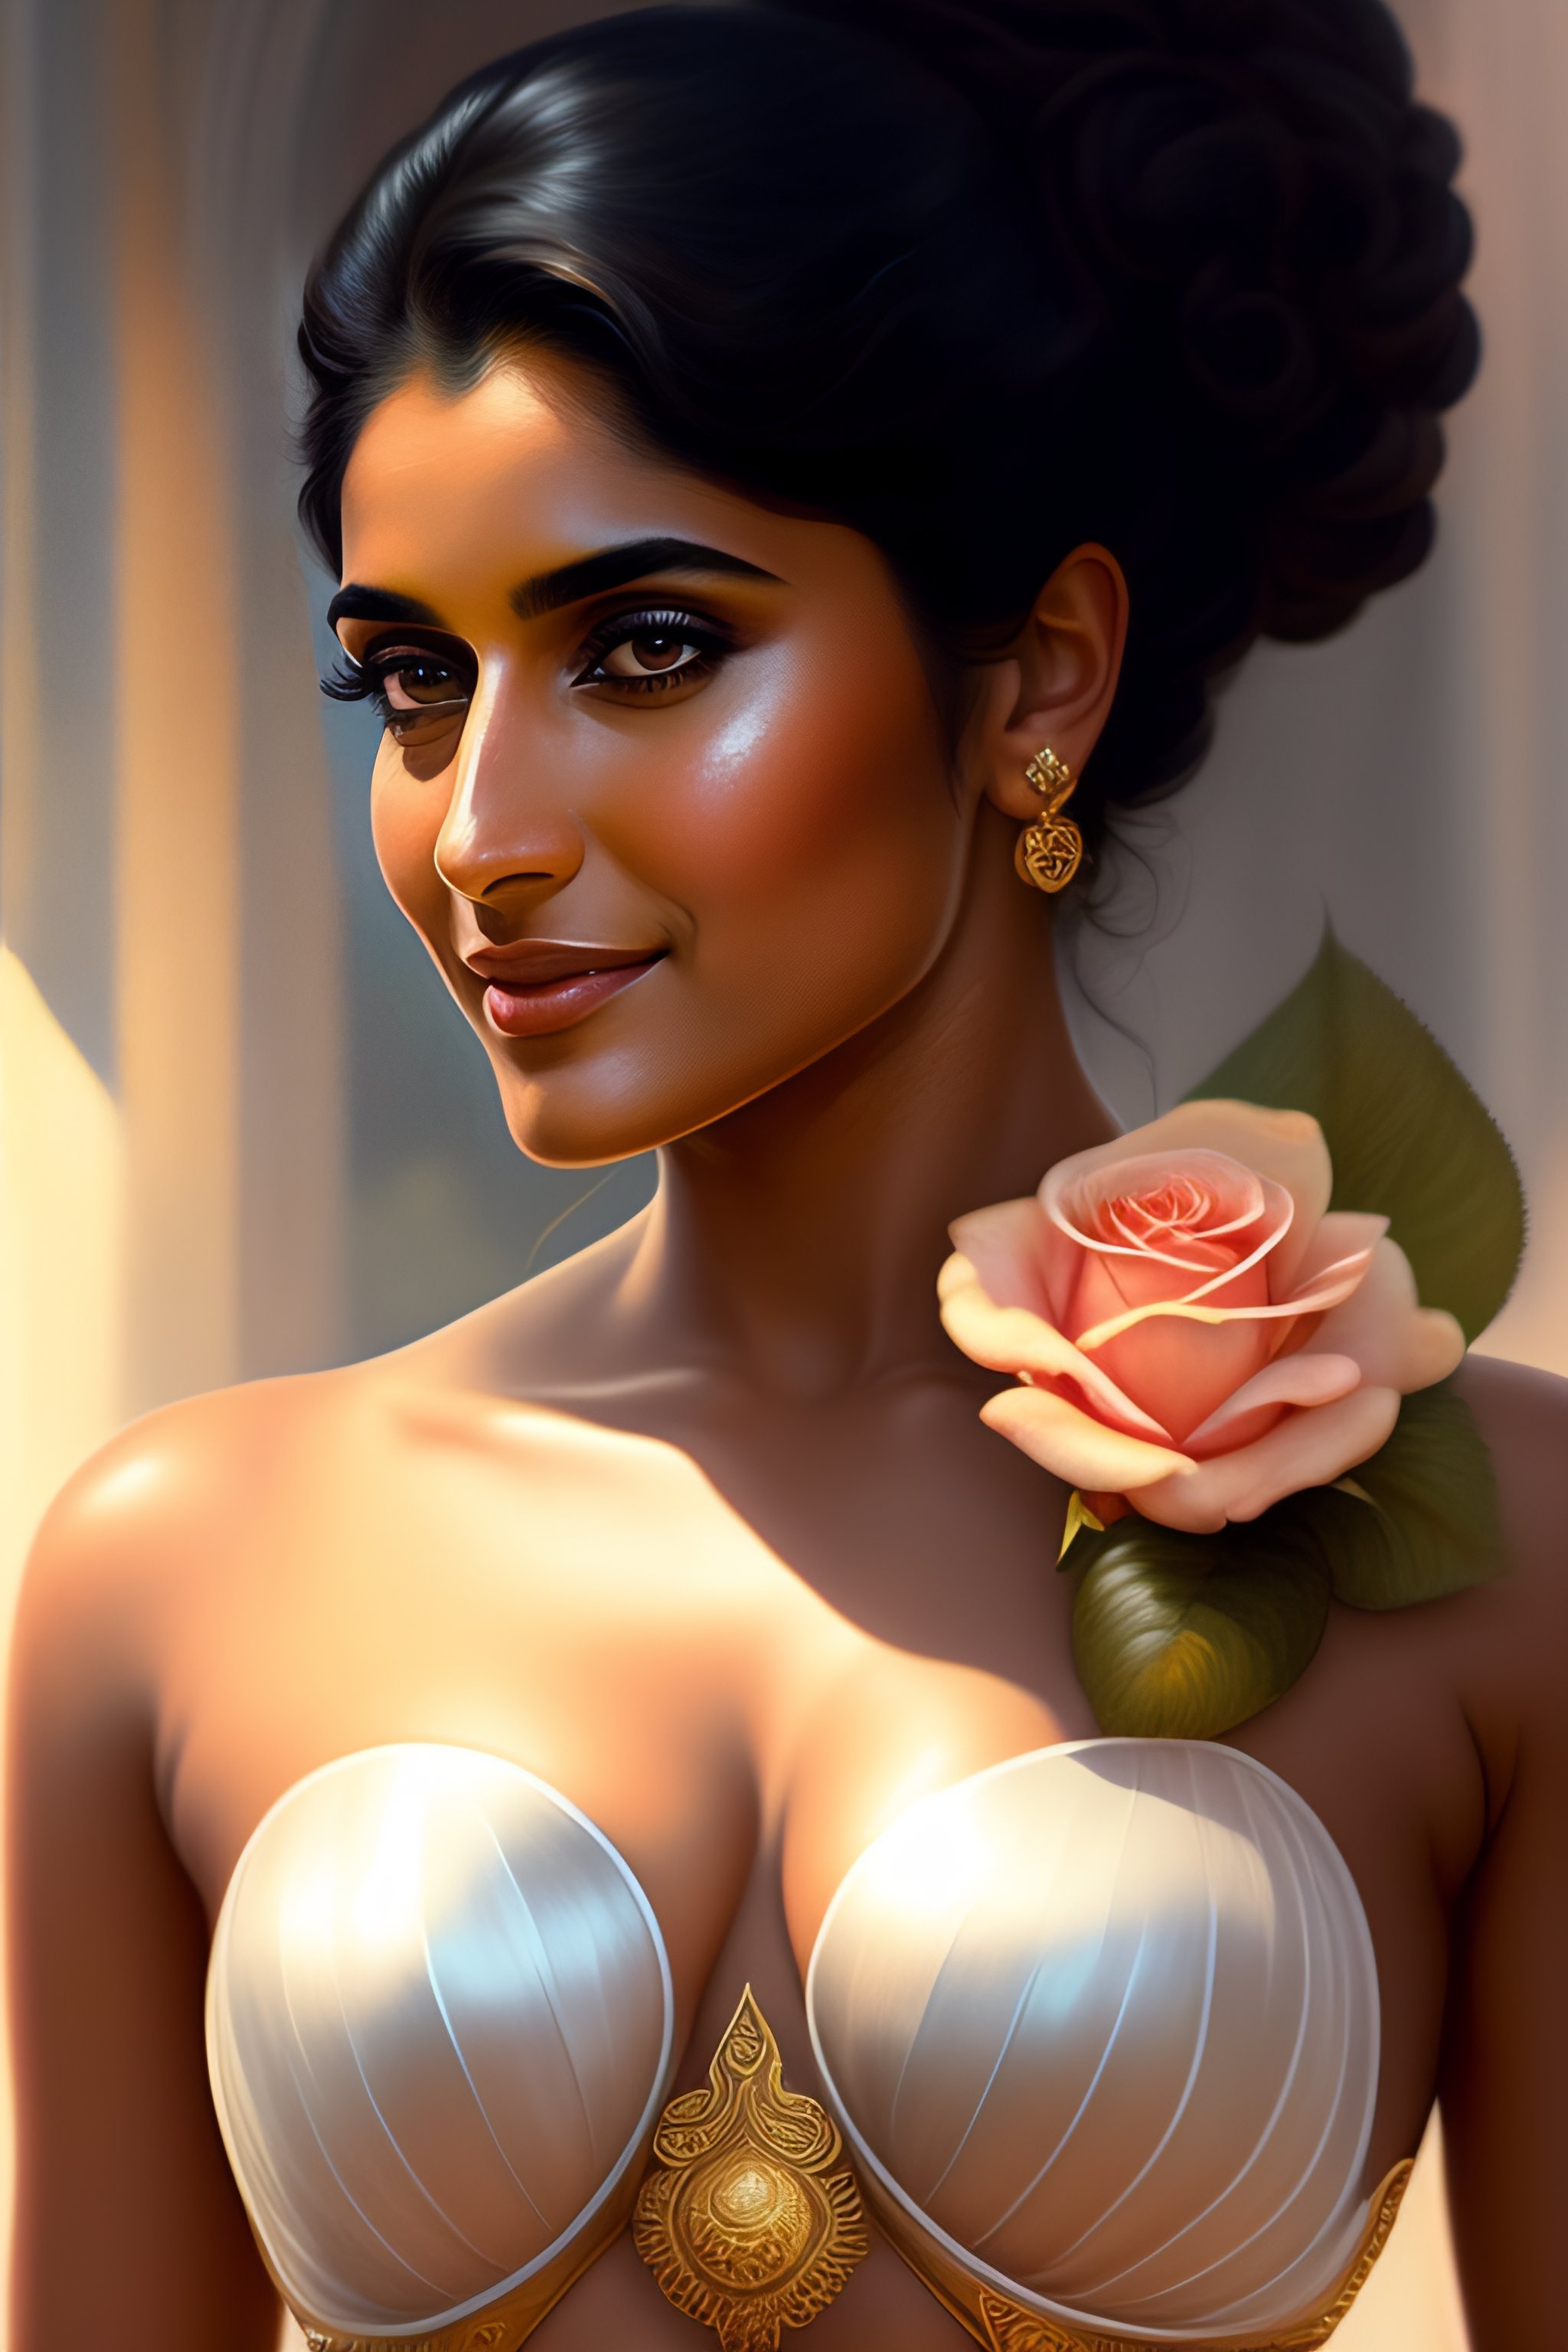 Lexica - Spanish woman niveda thomas, smelling a flower, roses everywhere, highly  detailed, silver bra with golden line design, big bra, digital pain